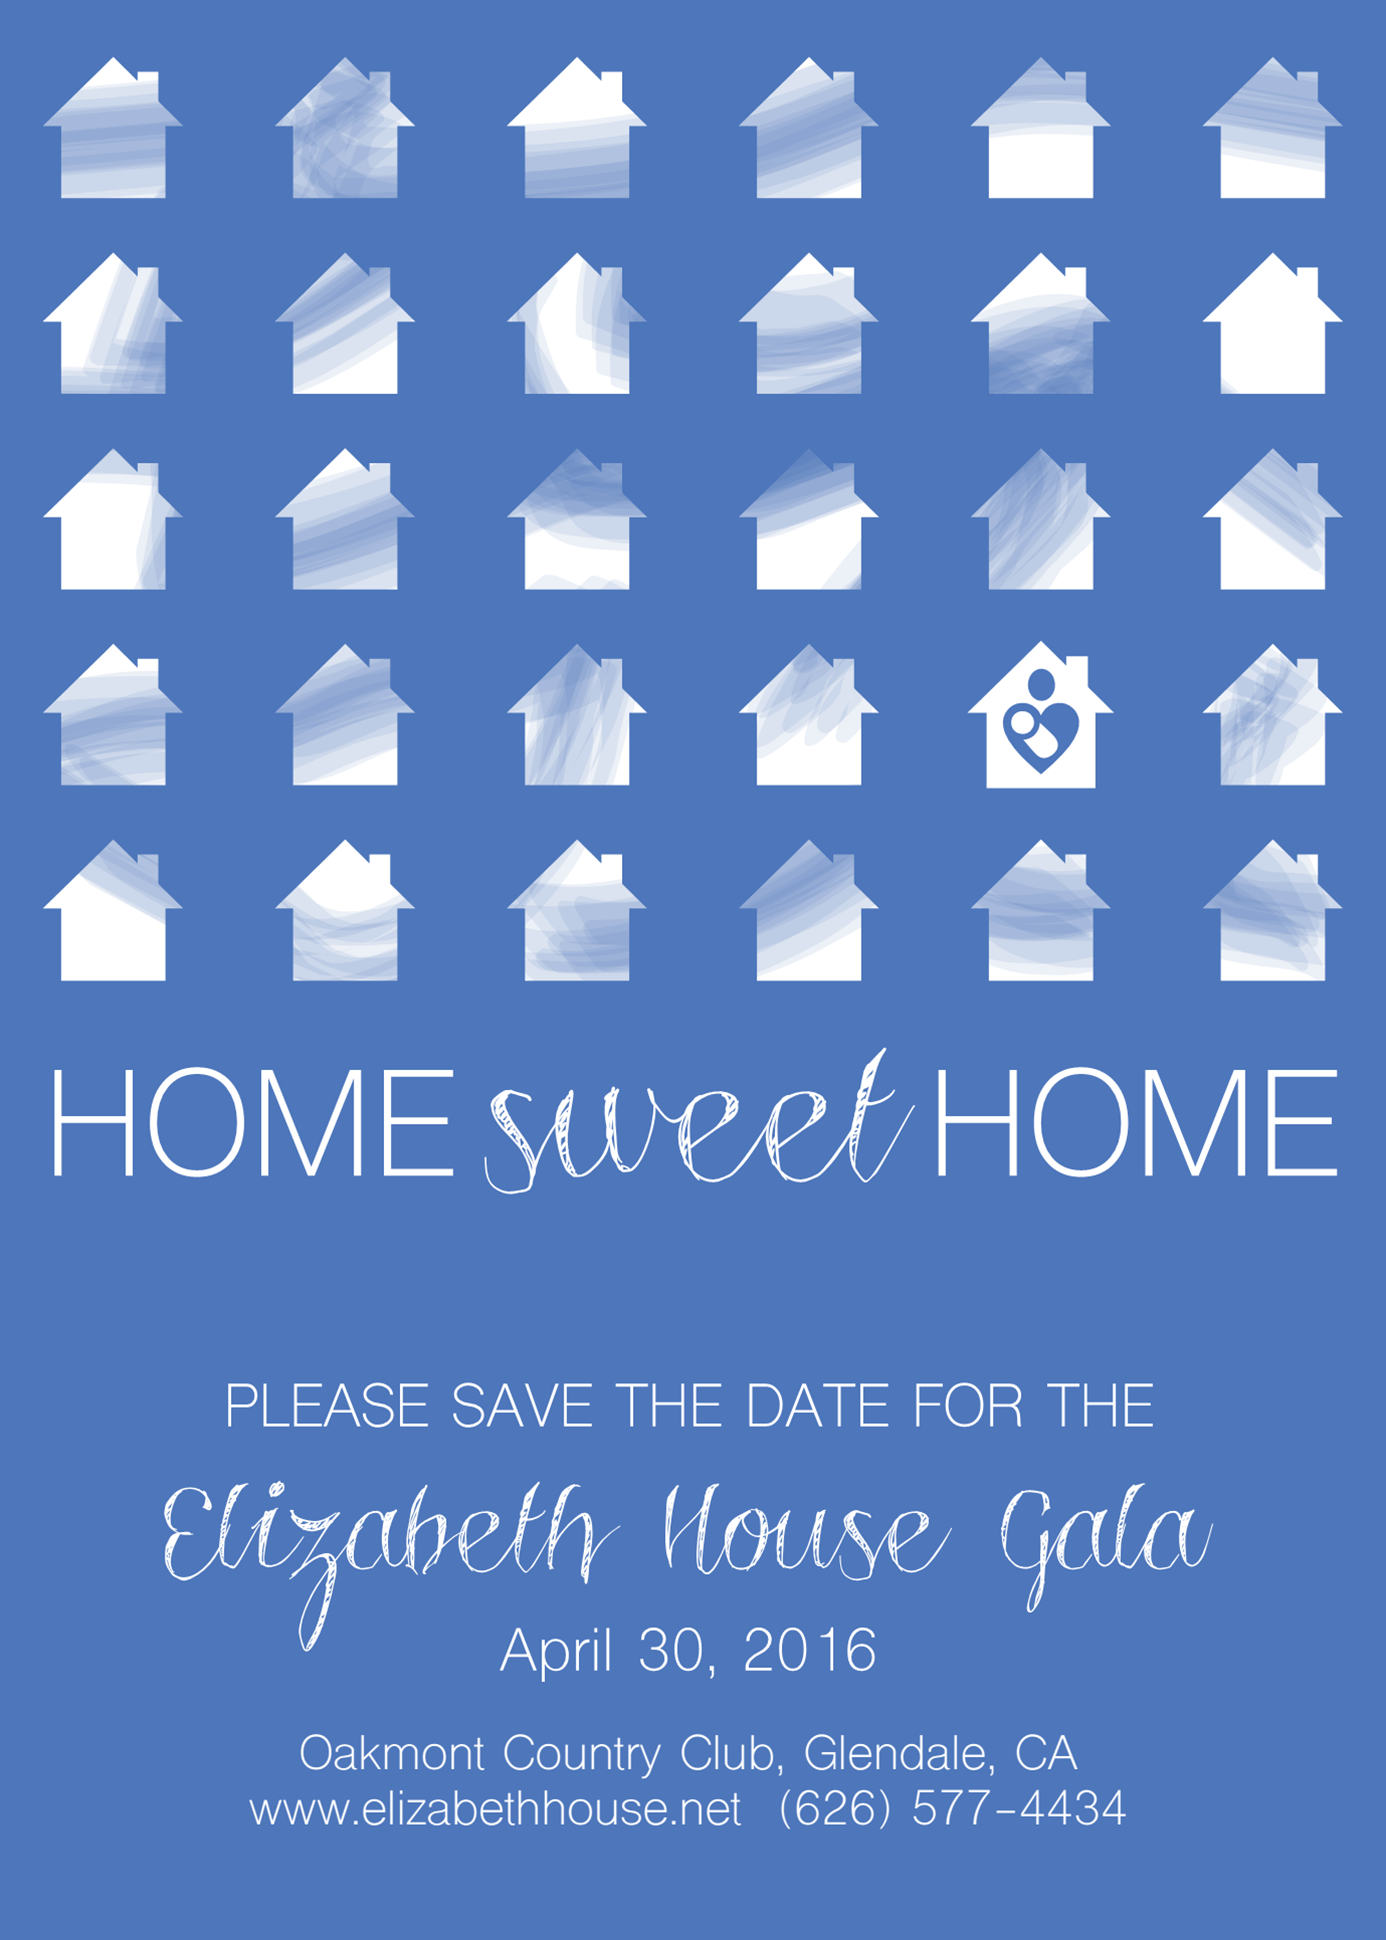 Save the Date Card - Website.png